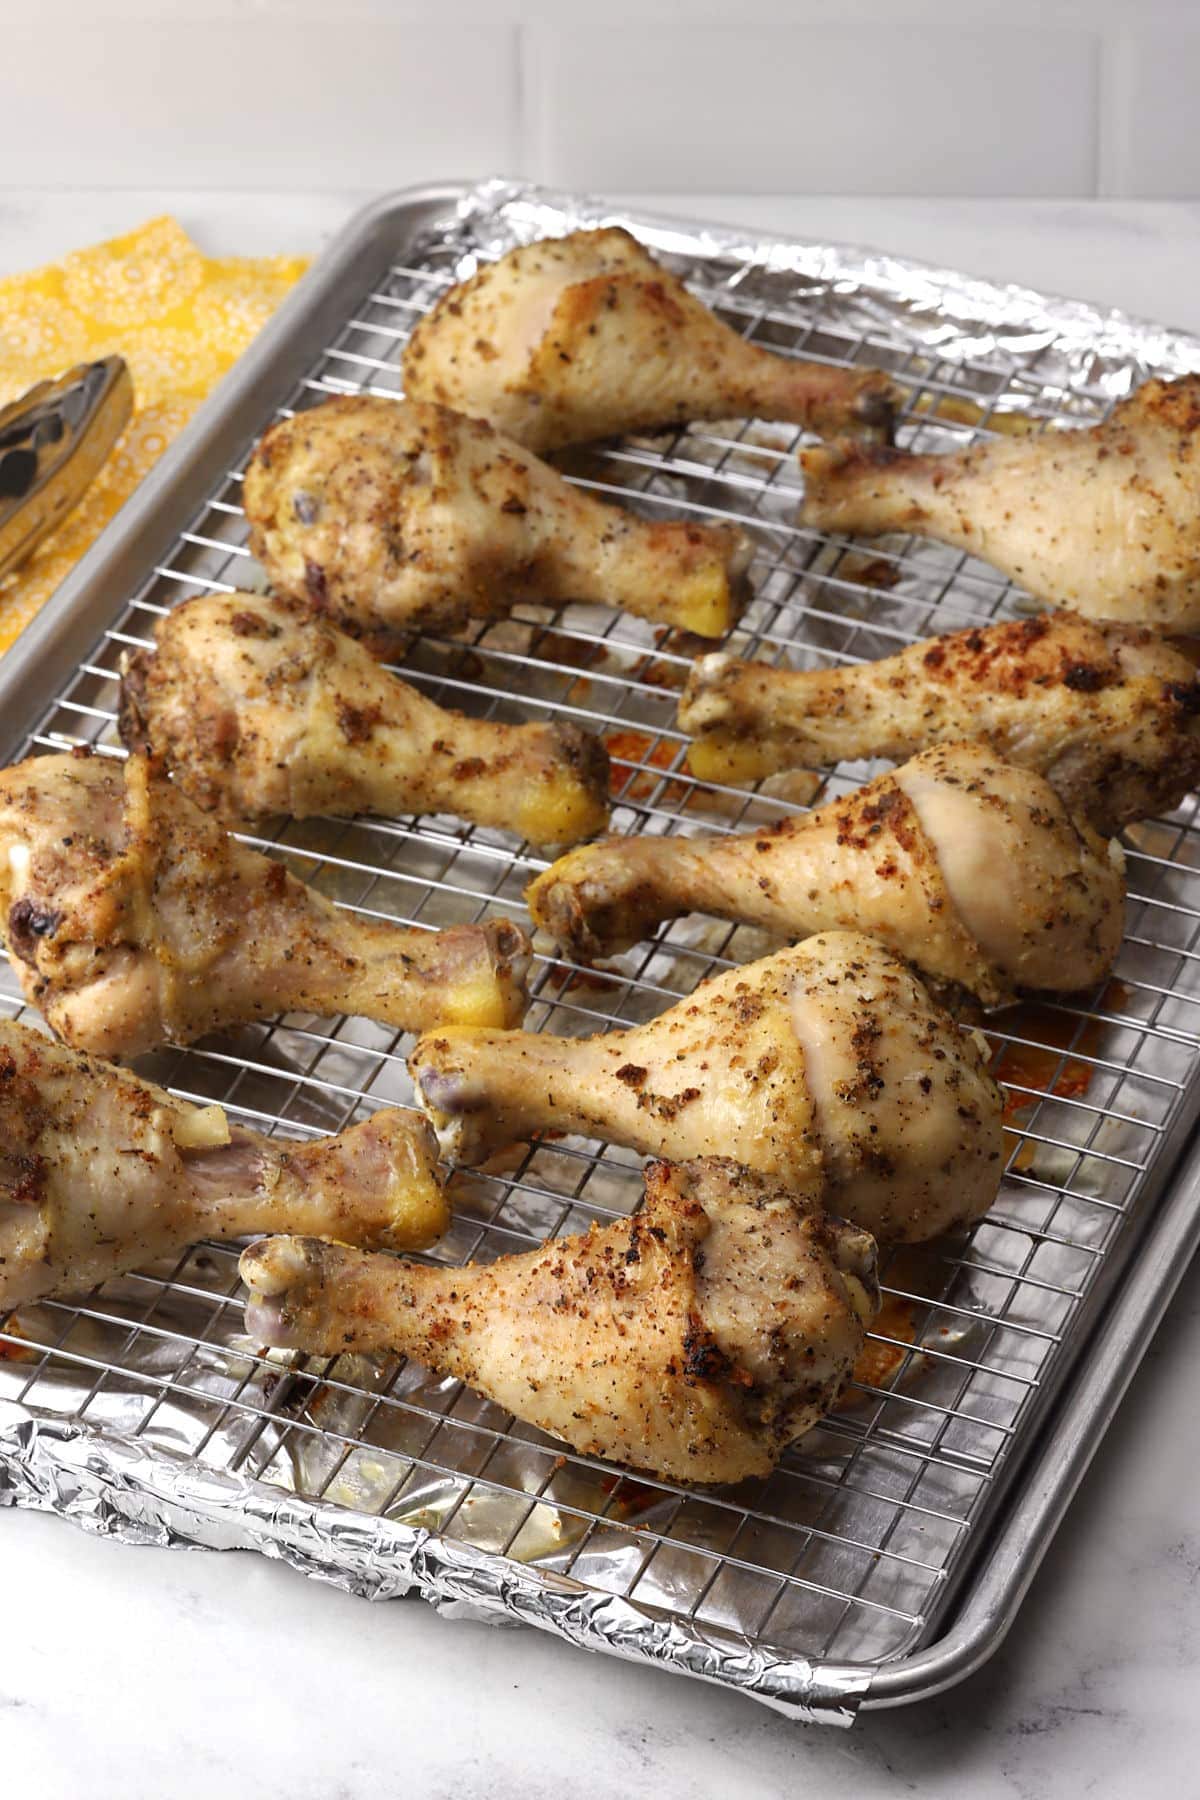 Oven roasted chicken drumsticks on a sheet pan.